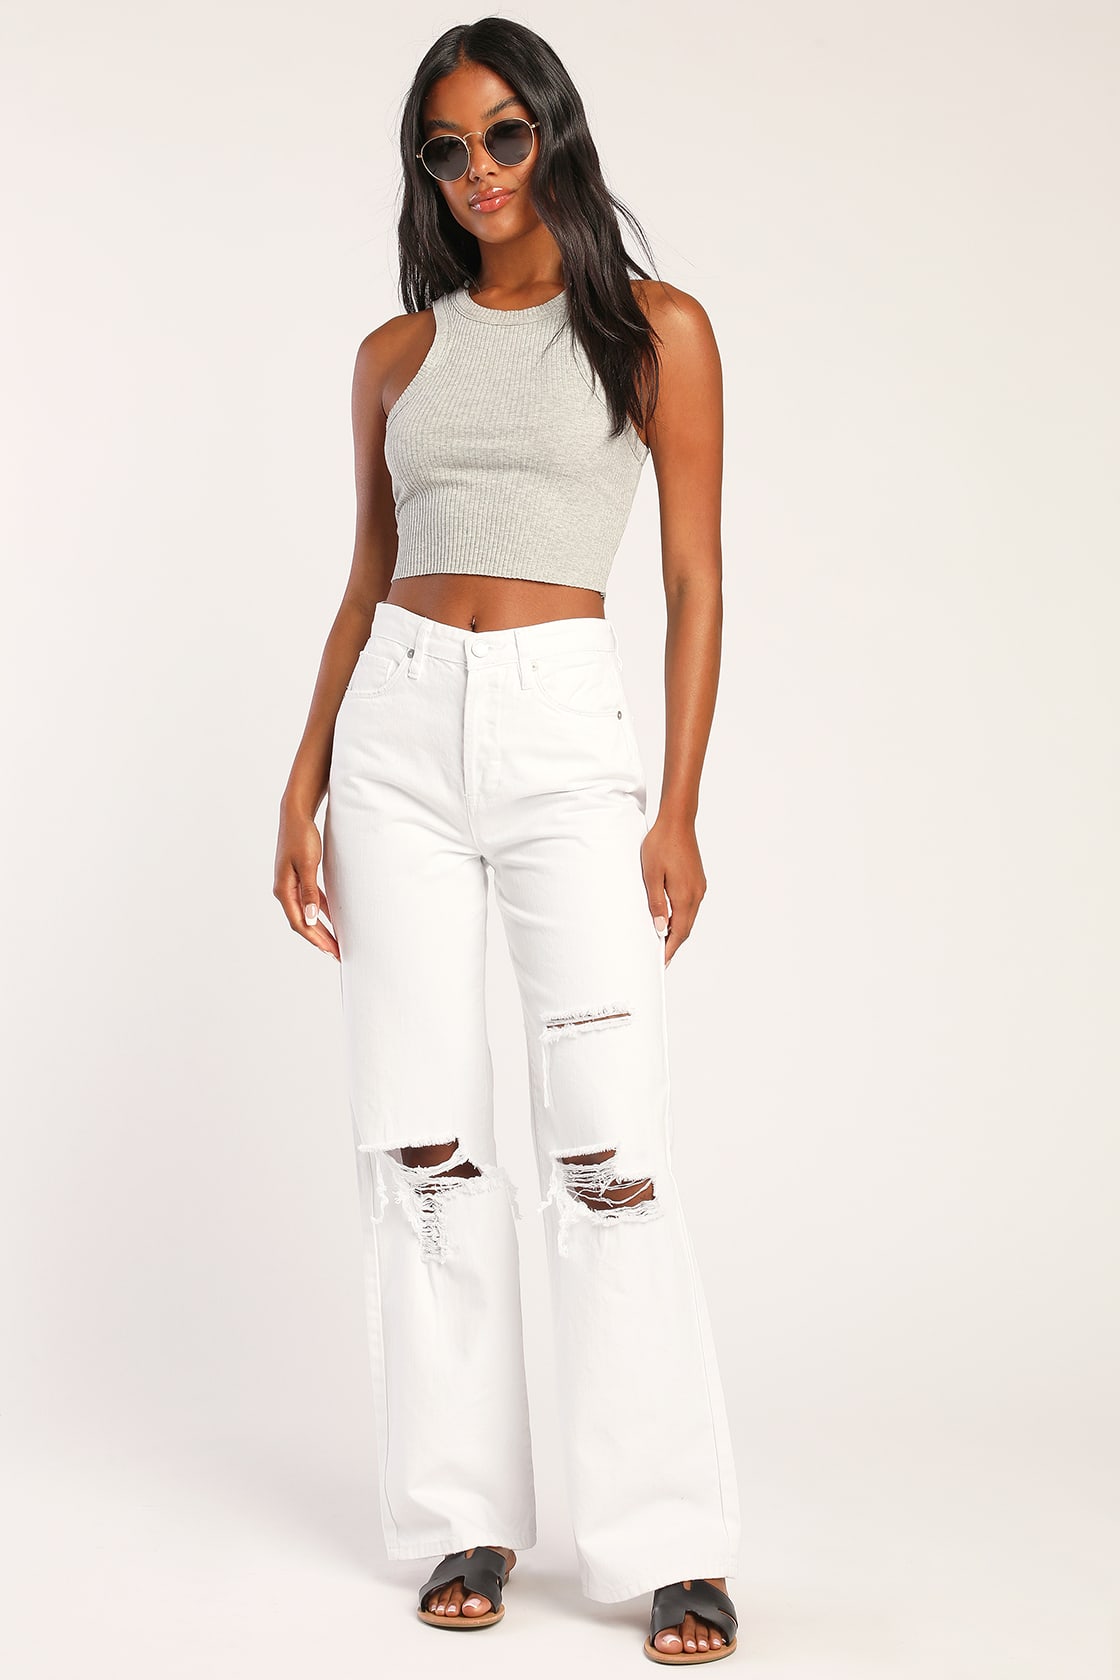 BlankNYC White Ripped Jeans